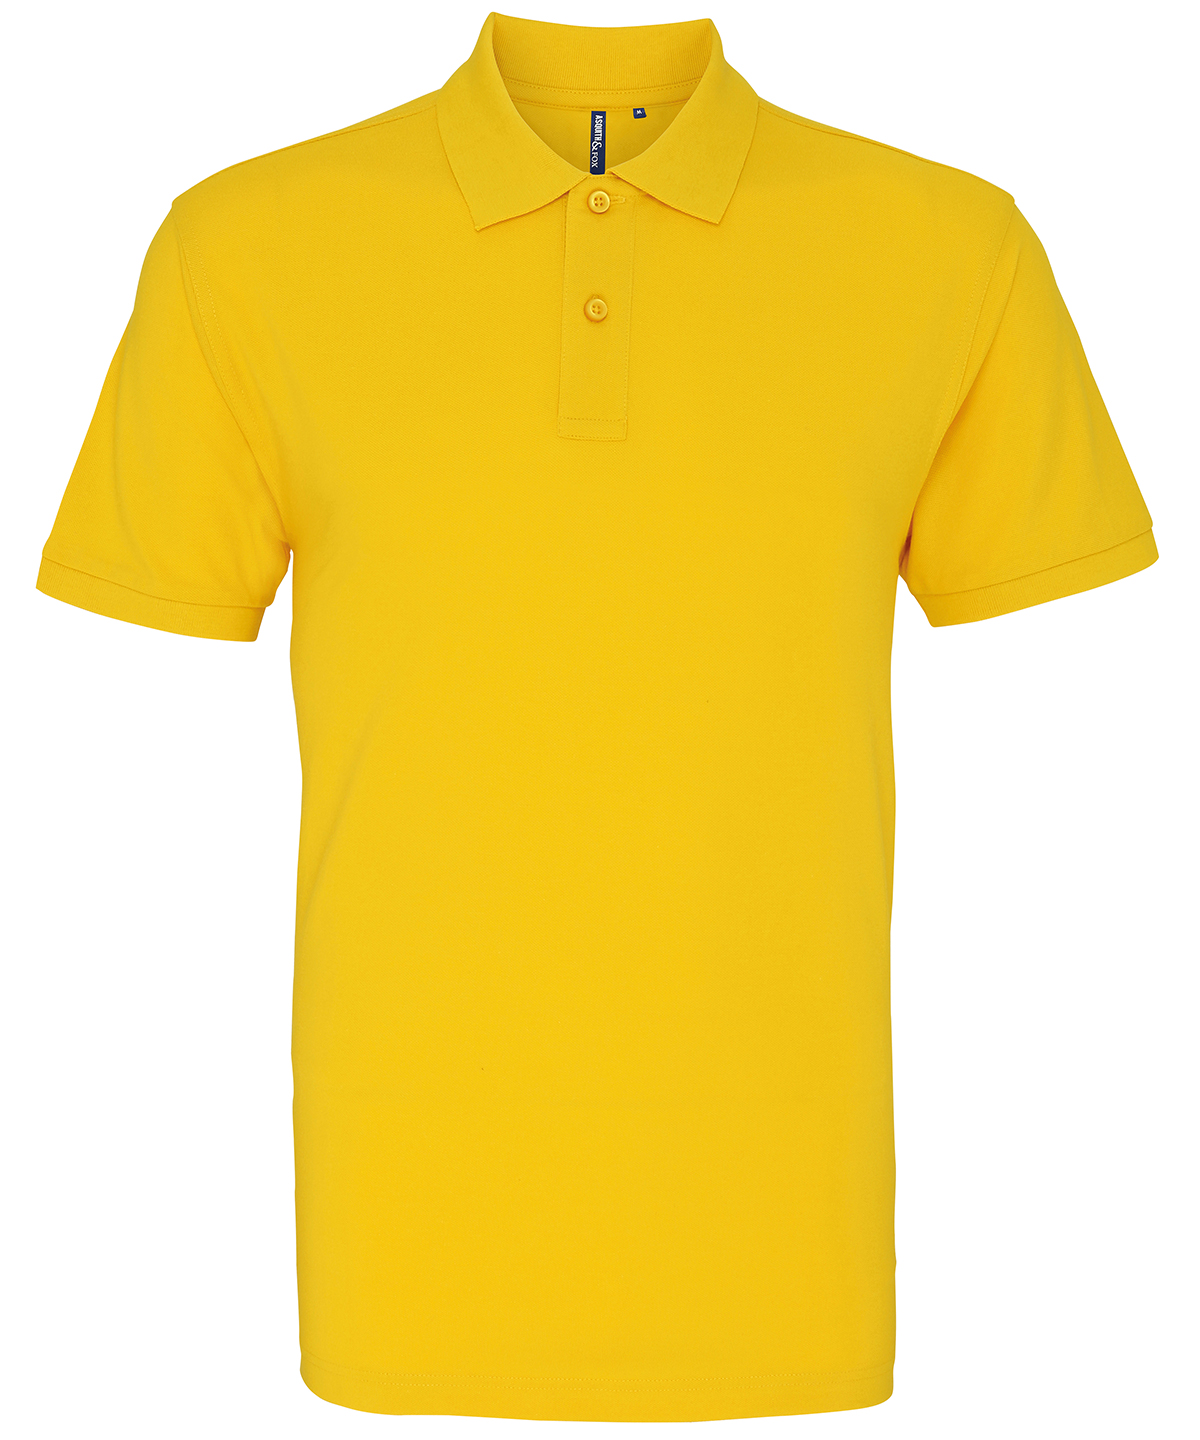 Men's Classic Fit Polo Shirts